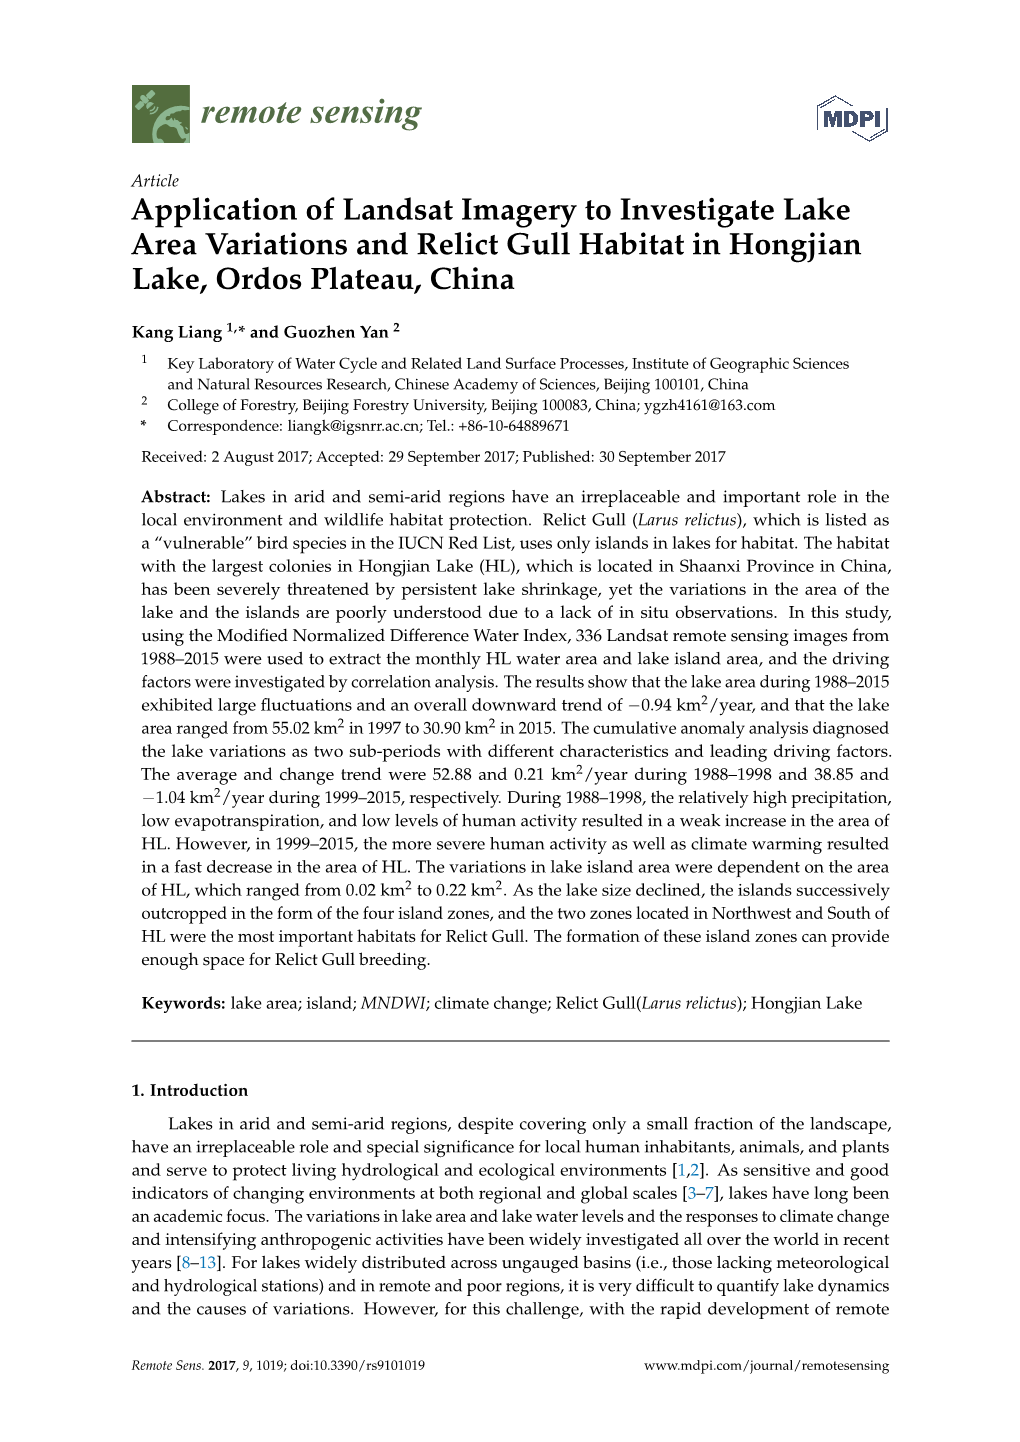 Application of Landsat Imagery to Investigate Lake Area Variations and Relict Gull Habitat in Hongjian Lake, Ordos Plateau, China